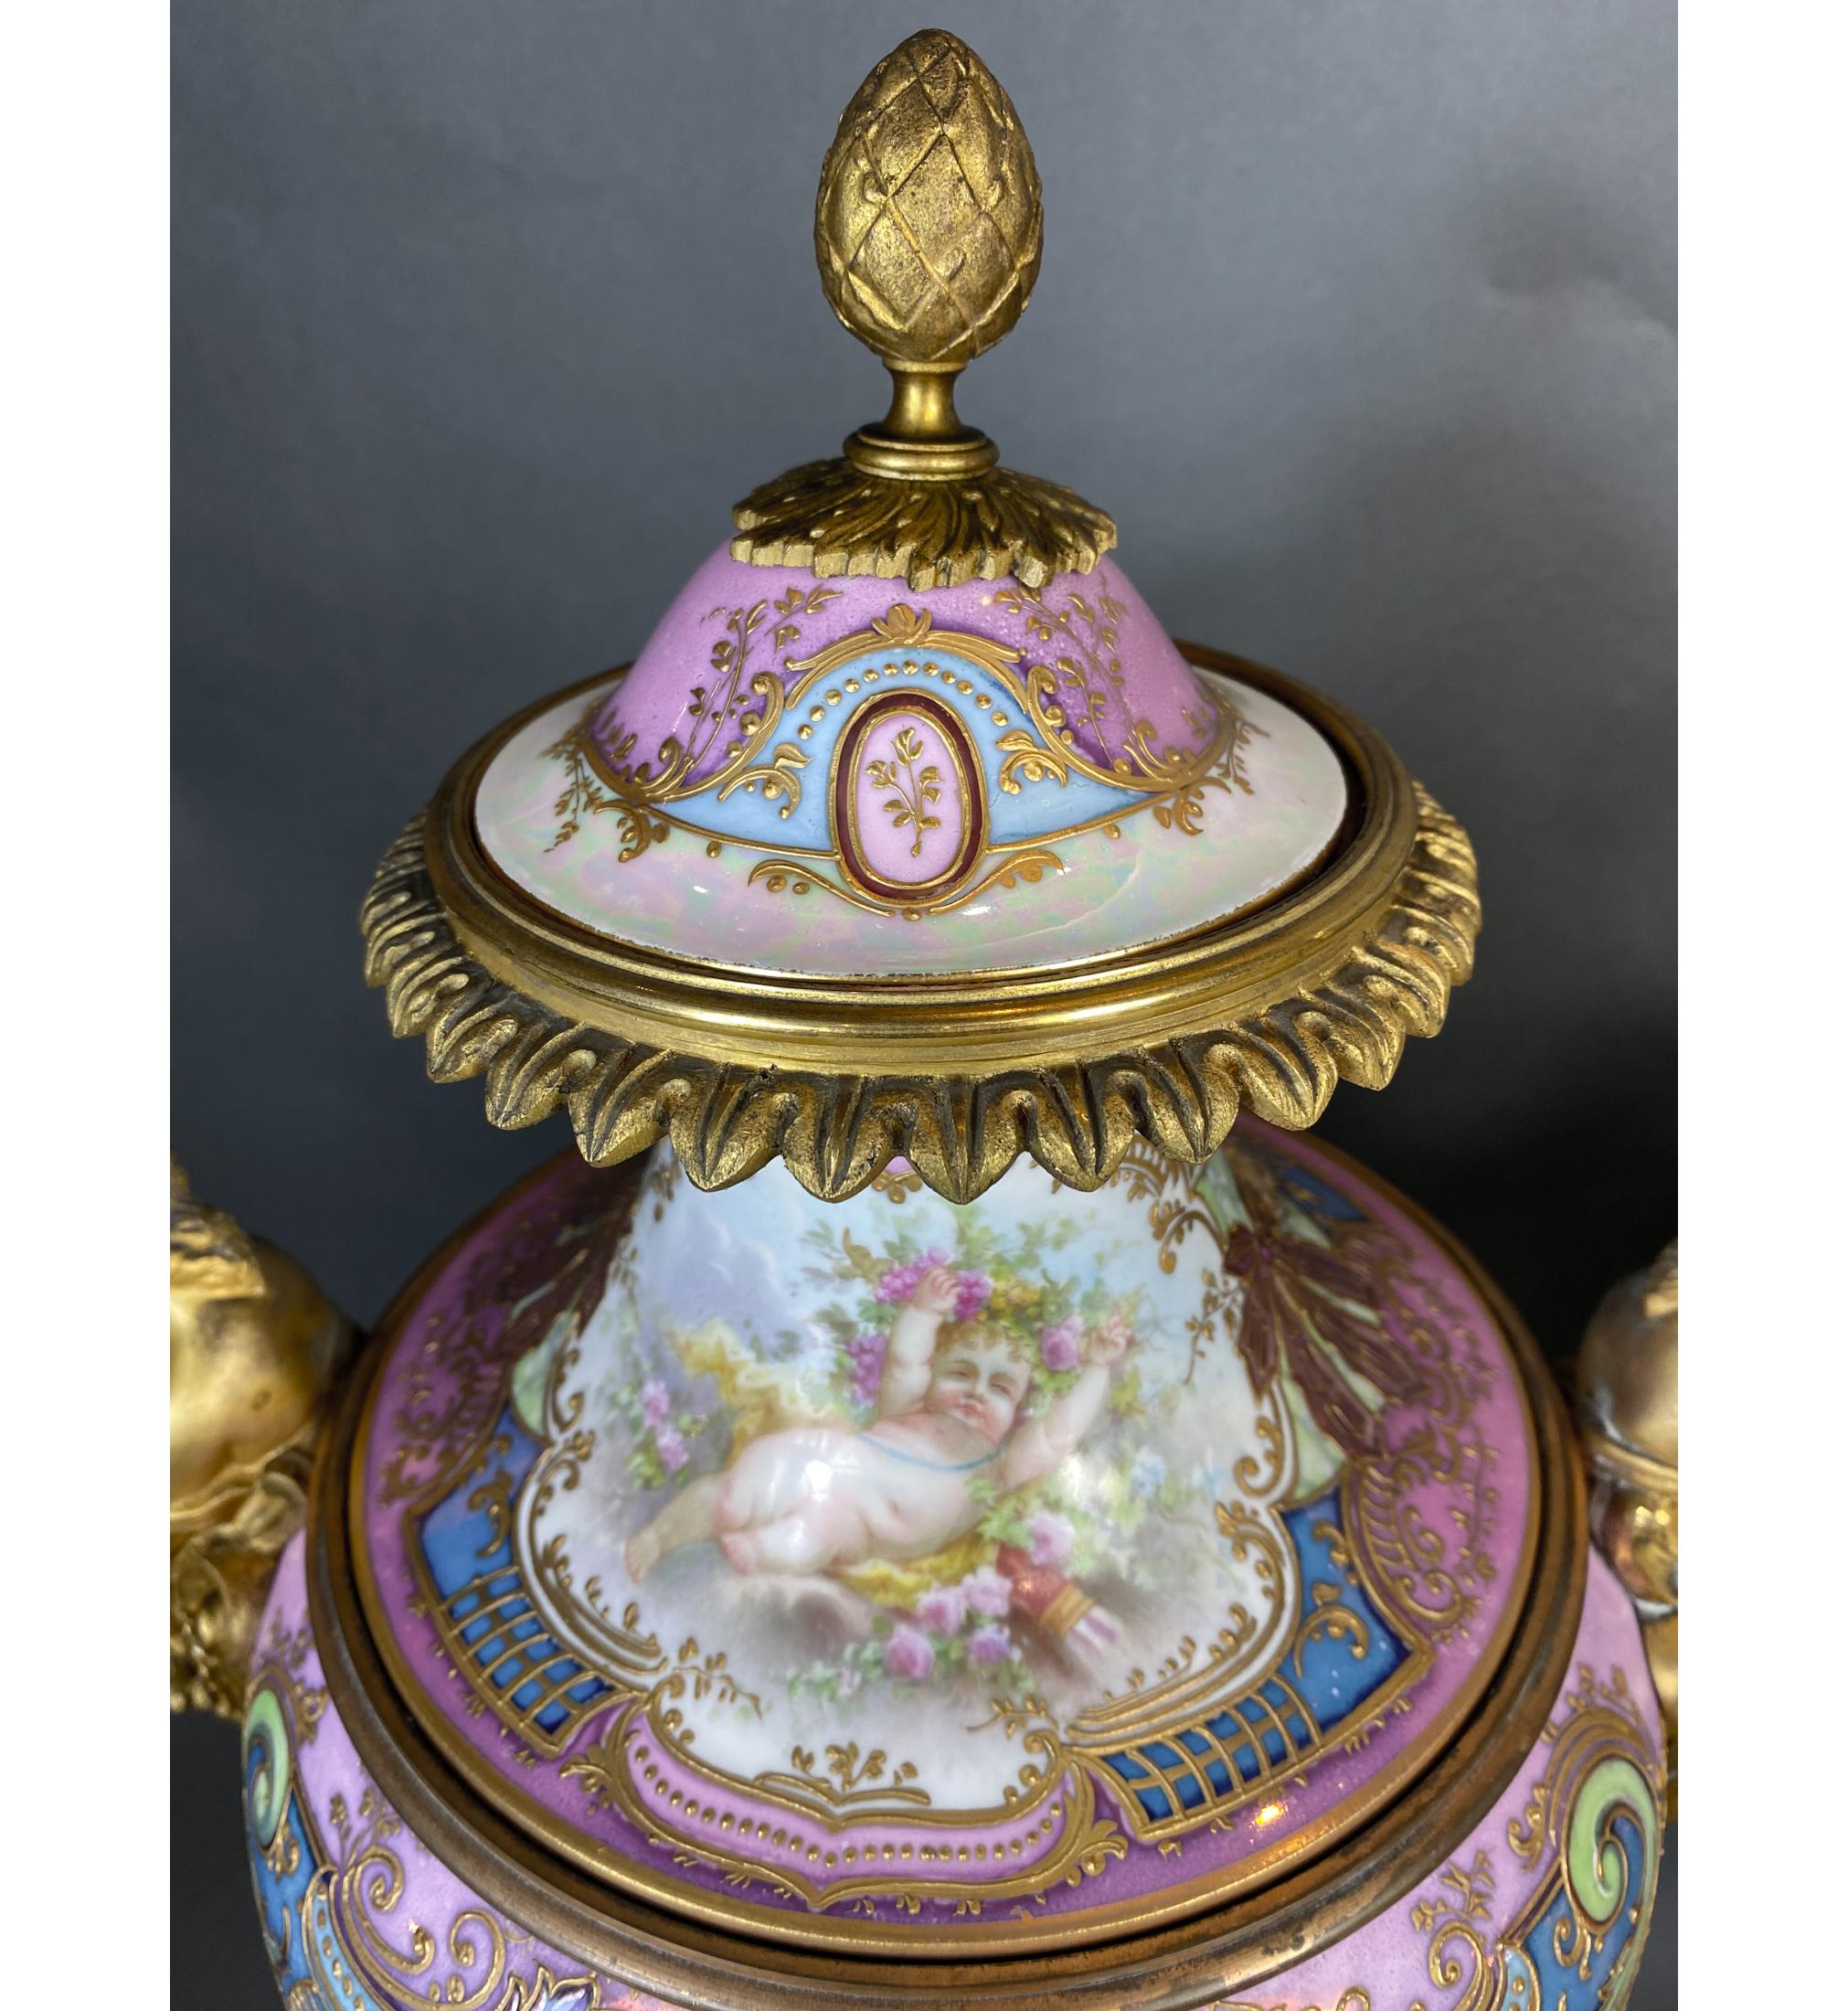 Pair of Ormolu-Mounted Sevres Style Vases with Garden Scene by A. Collot For Sale 4